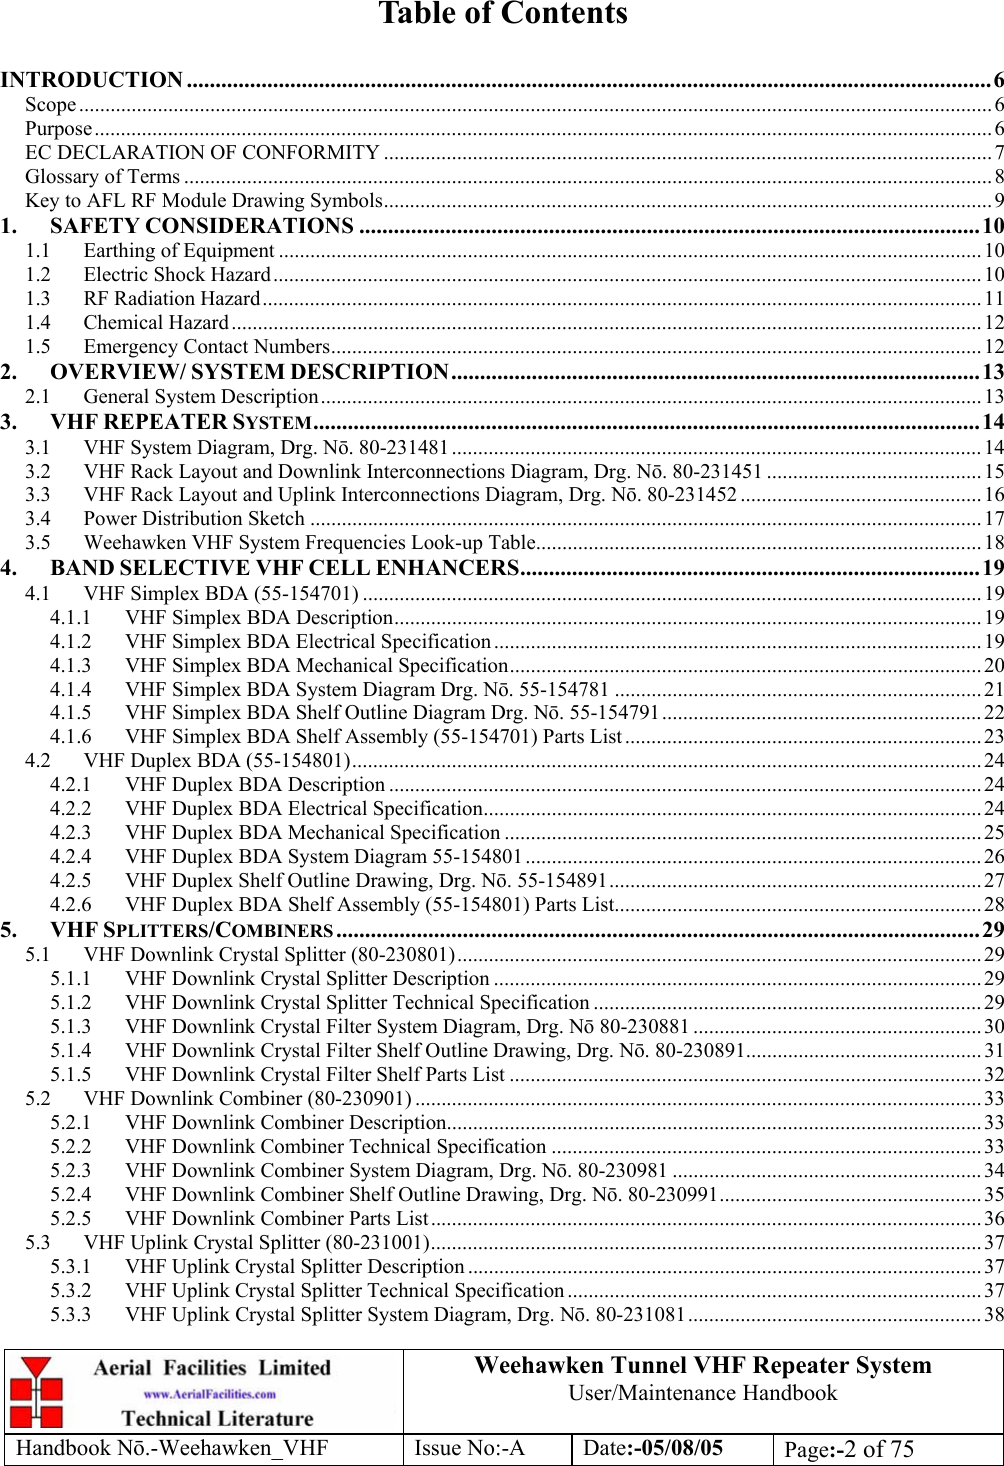  Weehawken Tunnel VHF Repeater System User/Maintenance Handbook Handbook N.-Weehawken_VHF Issue No:-A Date:-05/08/05  Page:-2 of 75   Table of Contents  INTRODUCTION ............................................................................................................................................6 Scope .............................................................................................................................................................................. 6 Purpose...........................................................................................................................................................................6 EC DECLARATION OF CONFORMITY .................................................................................................................... 7 Glossary of Terms ..........................................................................................................................................................8 Key to AFL RF Module Drawing Symbols....................................................................................................................9 1. SAFETY CONSIDERATIONS ............................................................................................................10 1.1 Earthing of Equipment ......................................................................................................................................10 1.2 Electric Shock Hazard.......................................................................................................................................10 1.3 RF Radiation Hazard.........................................................................................................................................11 1.4 Chemical Hazard............................................................................................................................................... 12 1.5 Emergency Contact Numbers............................................................................................................................ 12 2. OVERVIEW/ SYSTEM DESCRIPTION............................................................................................13 2.1 General System Description..............................................................................................................................13 3. VHF REPEATER SYSTEM....................................................................................................................14 3.1 VHF System Diagram, Drg. N. 80-231481 ..................................................................................................... 14 3.2 VHF Rack Layout and Downlink Interconnections Diagram, Drg. N. 80-231451 .........................................15 3.3 VHF Rack Layout and Uplink Interconnections Diagram, Drg. N. 80-231452 .............................................. 16 3.4 Power Distribution Sketch ................................................................................................................................17 3.5 Weehawken VHF System Frequencies Look-up Table.....................................................................................18 4. BAND SELECTIVE VHF CELL ENHANCERS................................................................................ 19 4.1 VHF Simplex BDA (55-154701) ...................................................................................................................... 19 4.1.1 VHF Simplex BDA Description................................................................................................................ 19 4.1.2 VHF Simplex BDA Electrical Specification .............................................................................................19 4.1.3 VHF Simplex BDA Mechanical Specification.......................................................................................... 20 4.1.4 VHF Simplex BDA System Diagram Drg. N. 55-154781 ...................................................................... 21 4.1.5 VHF Simplex BDA Shelf Outline Diagram Drg. N. 55-154791............................................................. 22 4.1.6 VHF Simplex BDA Shelf Assembly (55-154701) Parts List.................................................................... 23 4.2 VHF Duplex BDA (55-154801)........................................................................................................................24 4.2.1 VHF Duplex BDA Description ................................................................................................................. 24 4.2.2 VHF Duplex BDA Electrical Specification............................................................................................... 24 4.2.3 VHF Duplex BDA Mechanical Specification ........................................................................................... 25 4.2.4 VHF Duplex BDA System Diagram 55-154801....................................................................................... 26 4.2.5 VHF Duplex Shelf Outline Drawing, Drg. N. 55-154891....................................................................... 27 4.2.6 VHF Duplex BDA Shelf Assembly (55-154801) Parts List...................................................................... 28 5. VHF SPLITTERS/COMBINERS ................................................................................................................29 5.1 VHF Downlink Crystal Splitter (80-230801).................................................................................................... 29 5.1.1 VHF Downlink Crystal Splitter Description ............................................................................................. 29 5.1.2 VHF Downlink Crystal Splitter Technical Specification .......................................................................... 29 5.1.3 VHF Downlink Crystal Filter System Diagram, Drg. N 80-230881 .......................................................30 5.1.4 VHF Downlink Crystal Filter Shelf Outline Drawing, Drg. N. 80-230891.............................................31 5.1.5 VHF Downlink Crystal Filter Shelf Parts List .......................................................................................... 32 5.2 VHF Downlink Combiner (80-230901) ............................................................................................................ 33 5.2.1 VHF Downlink Combiner Description......................................................................................................33 5.2.2 VHF Downlink Combiner Technical Specification ..................................................................................33 5.2.3 VHF Downlink Combiner System Diagram, Drg. N. 80-230981 ...........................................................34 5.2.4 VHF Downlink Combiner Shelf Outline Drawing, Drg. N. 80-230991.................................................. 35 5.2.5 VHF Downlink Combiner Parts List......................................................................................................... 36 5.3 VHF Uplink Crystal Splitter (80-231001)......................................................................................................... 37 5.3.1 VHF Uplink Crystal Splitter Description ..................................................................................................37 5.3.2 VHF Uplink Crystal Splitter Technical Specification ...............................................................................37 5.3.3 VHF Uplink Crystal Splitter System Diagram, Drg. N. 80-231081........................................................ 38 